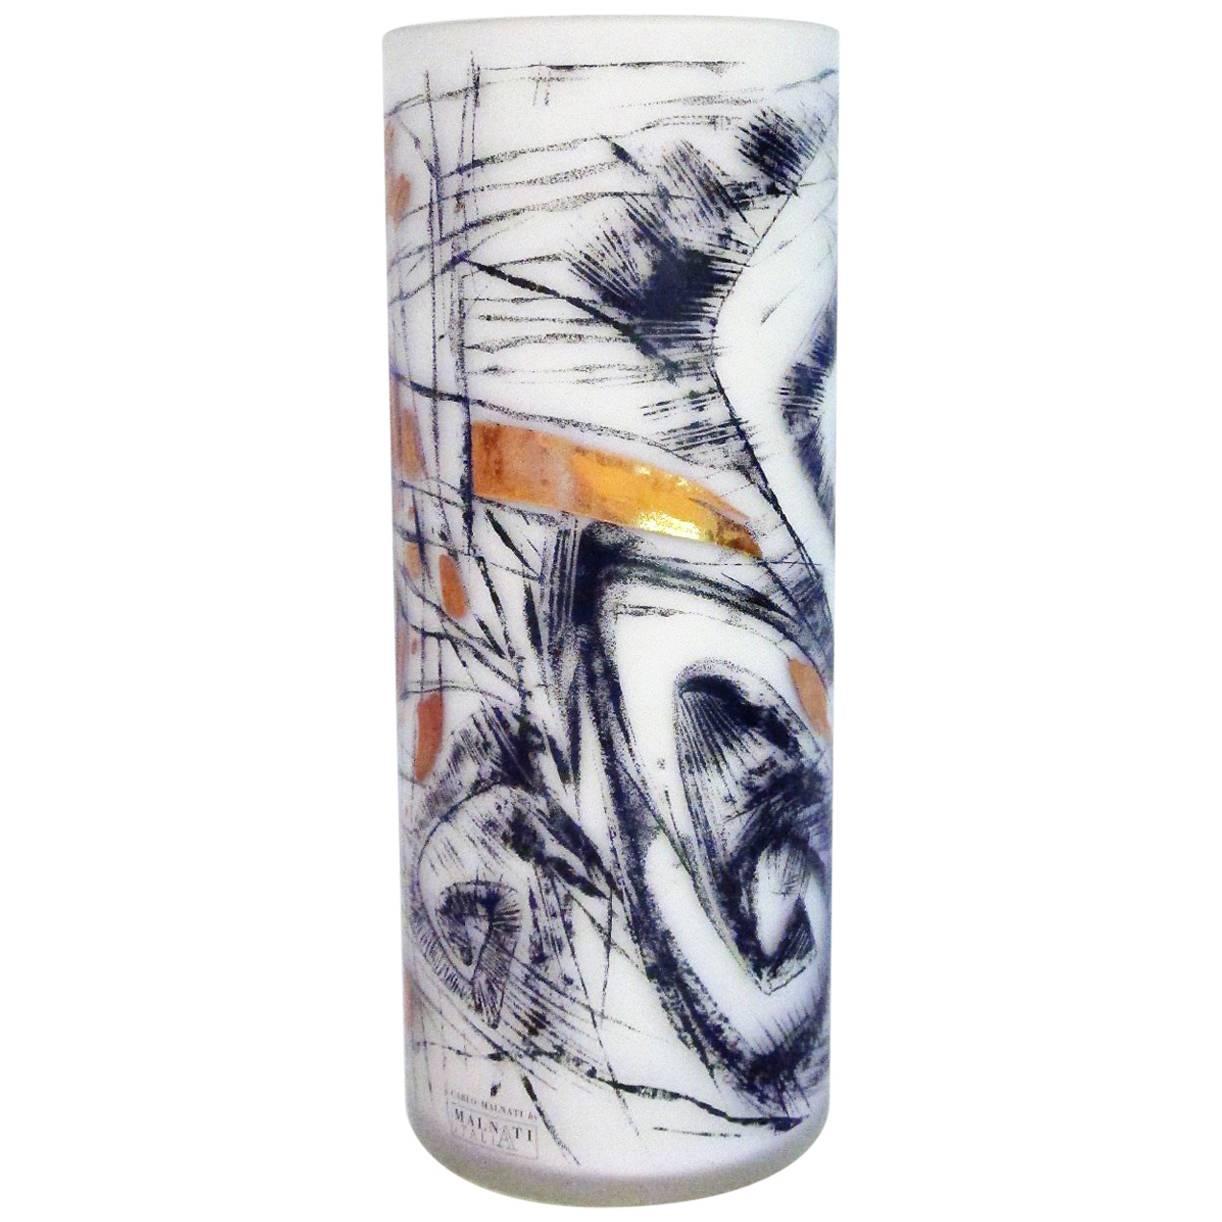 Carlo Malnati Italian Glass Vase with Abstract Graphic Design and Gold Overlay